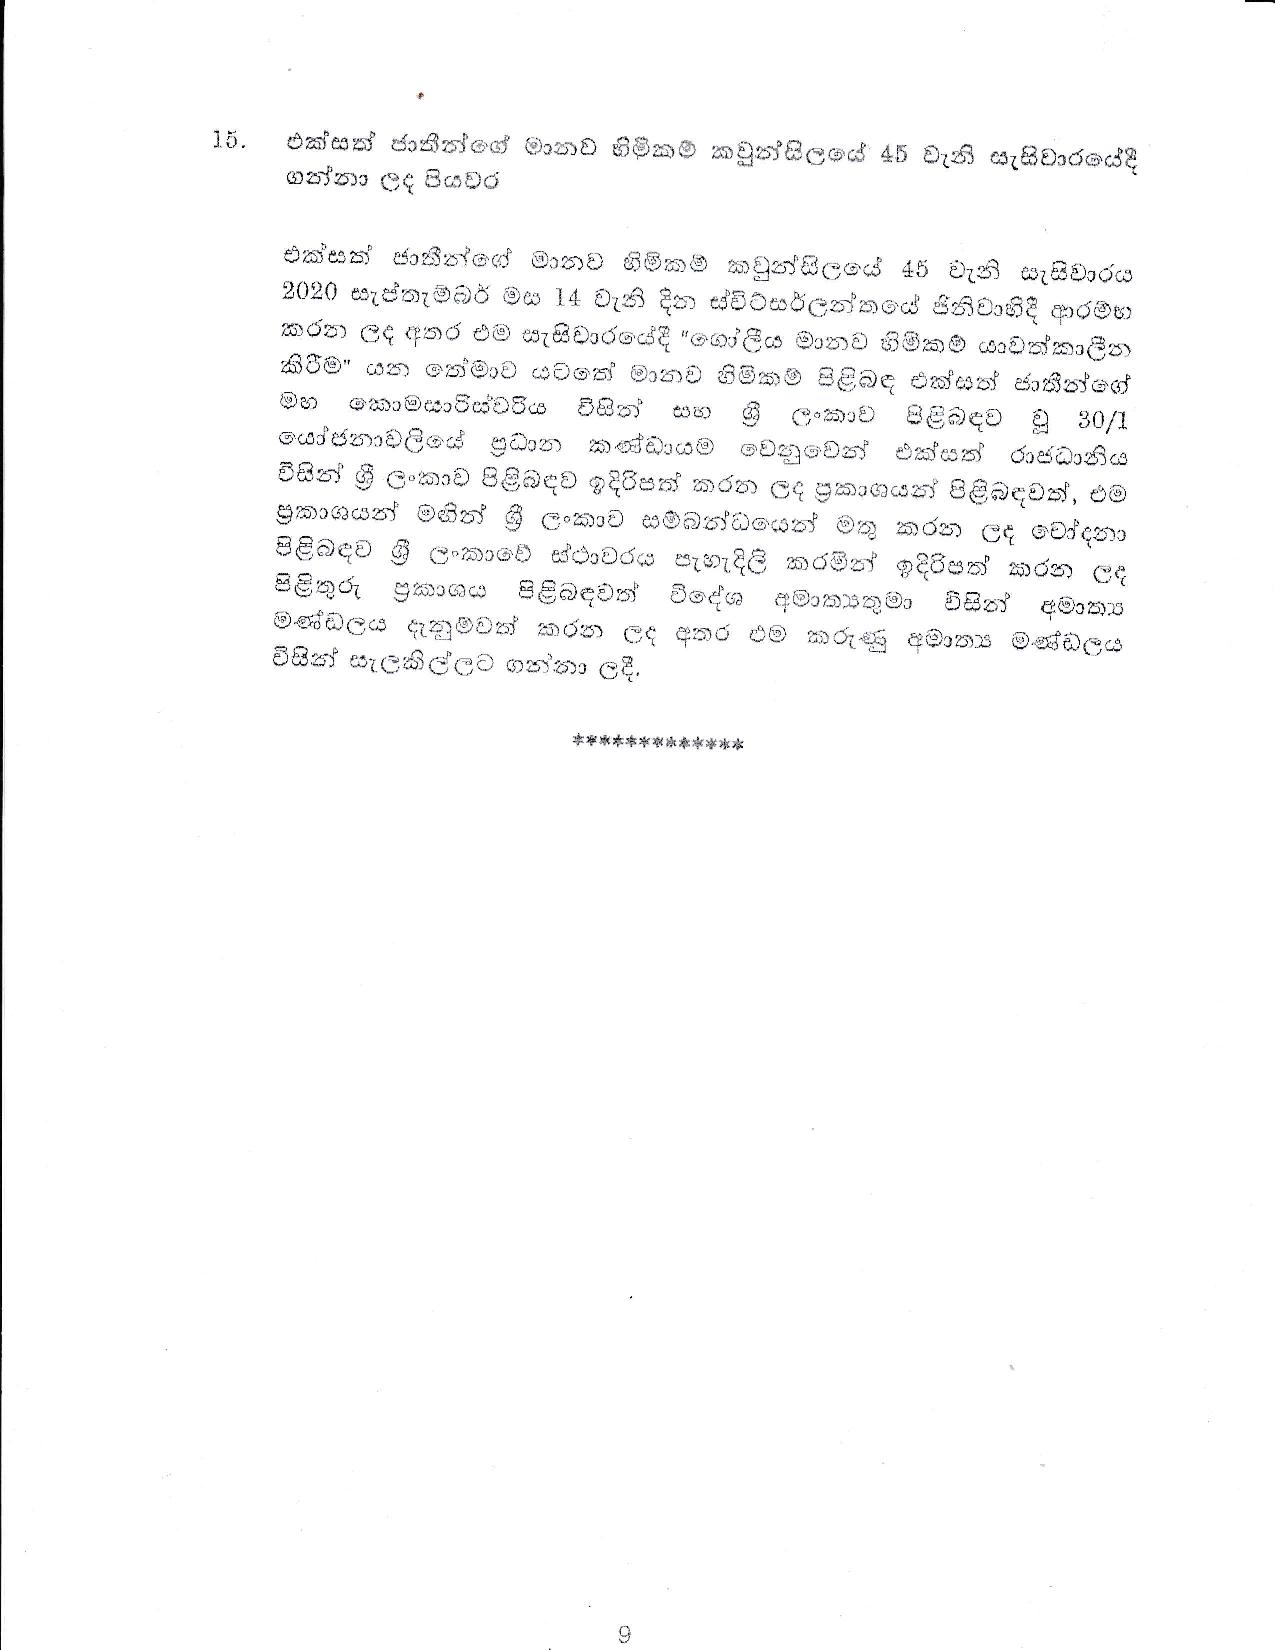 Cabinet Decision on 16.09.2020 page 009